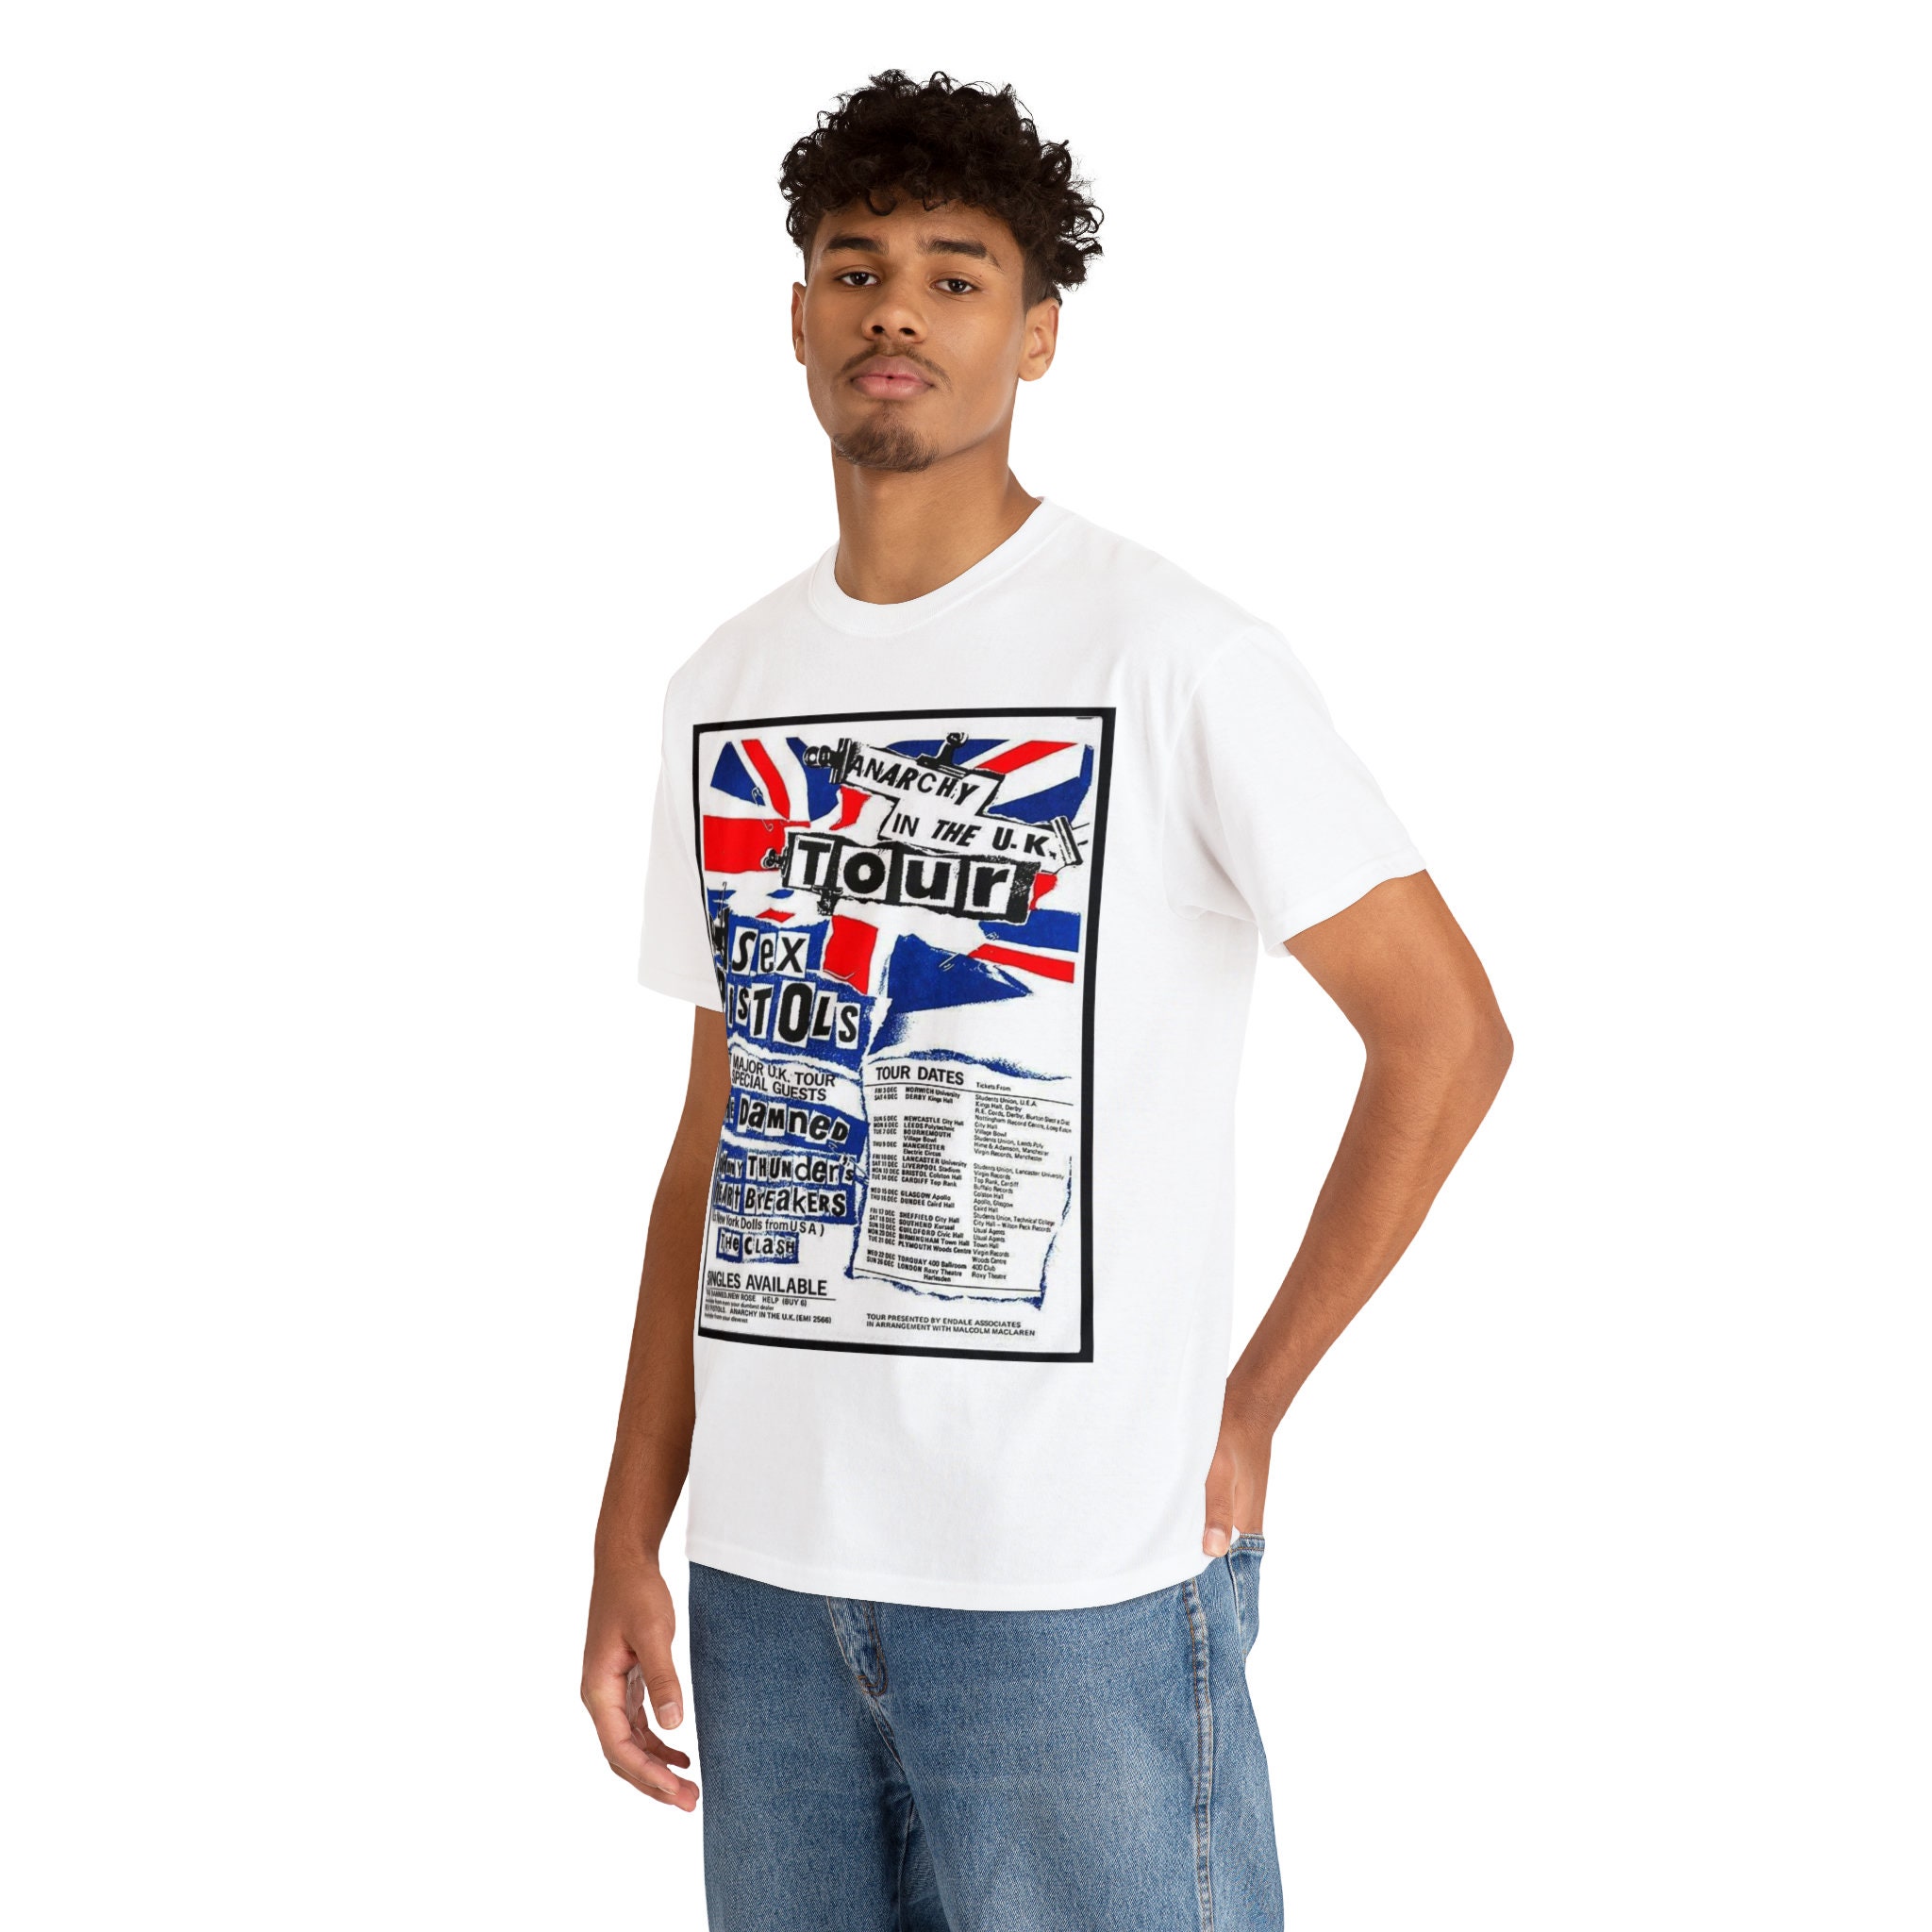 Ray Manchester - Heroic | Graphic T-Shirt